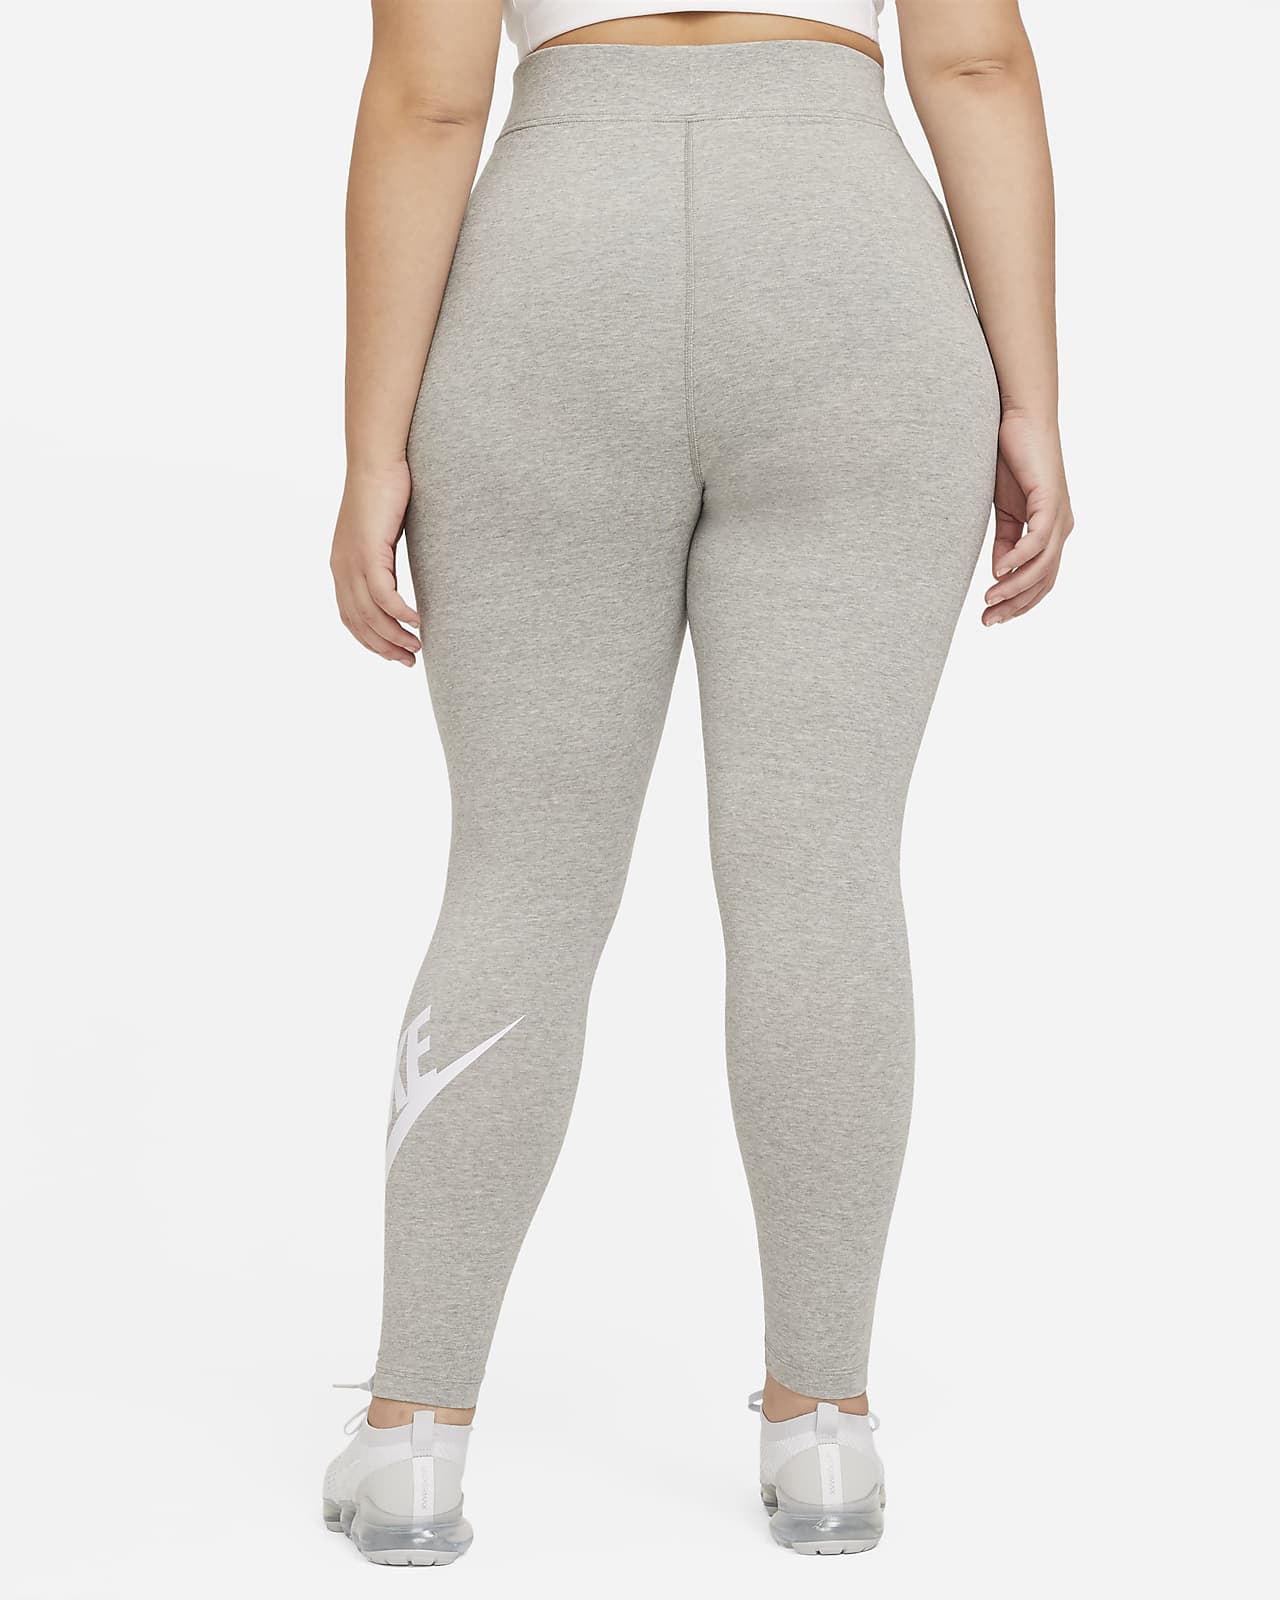 https://static.nike.com/a/images/t_PDP_1280_v1/f_auto,q_auto:eco/173bf2cc-ac78-4877-9320-dbe805553921/sportswear-essential-high-waisted-leggings-s0k1hs.png